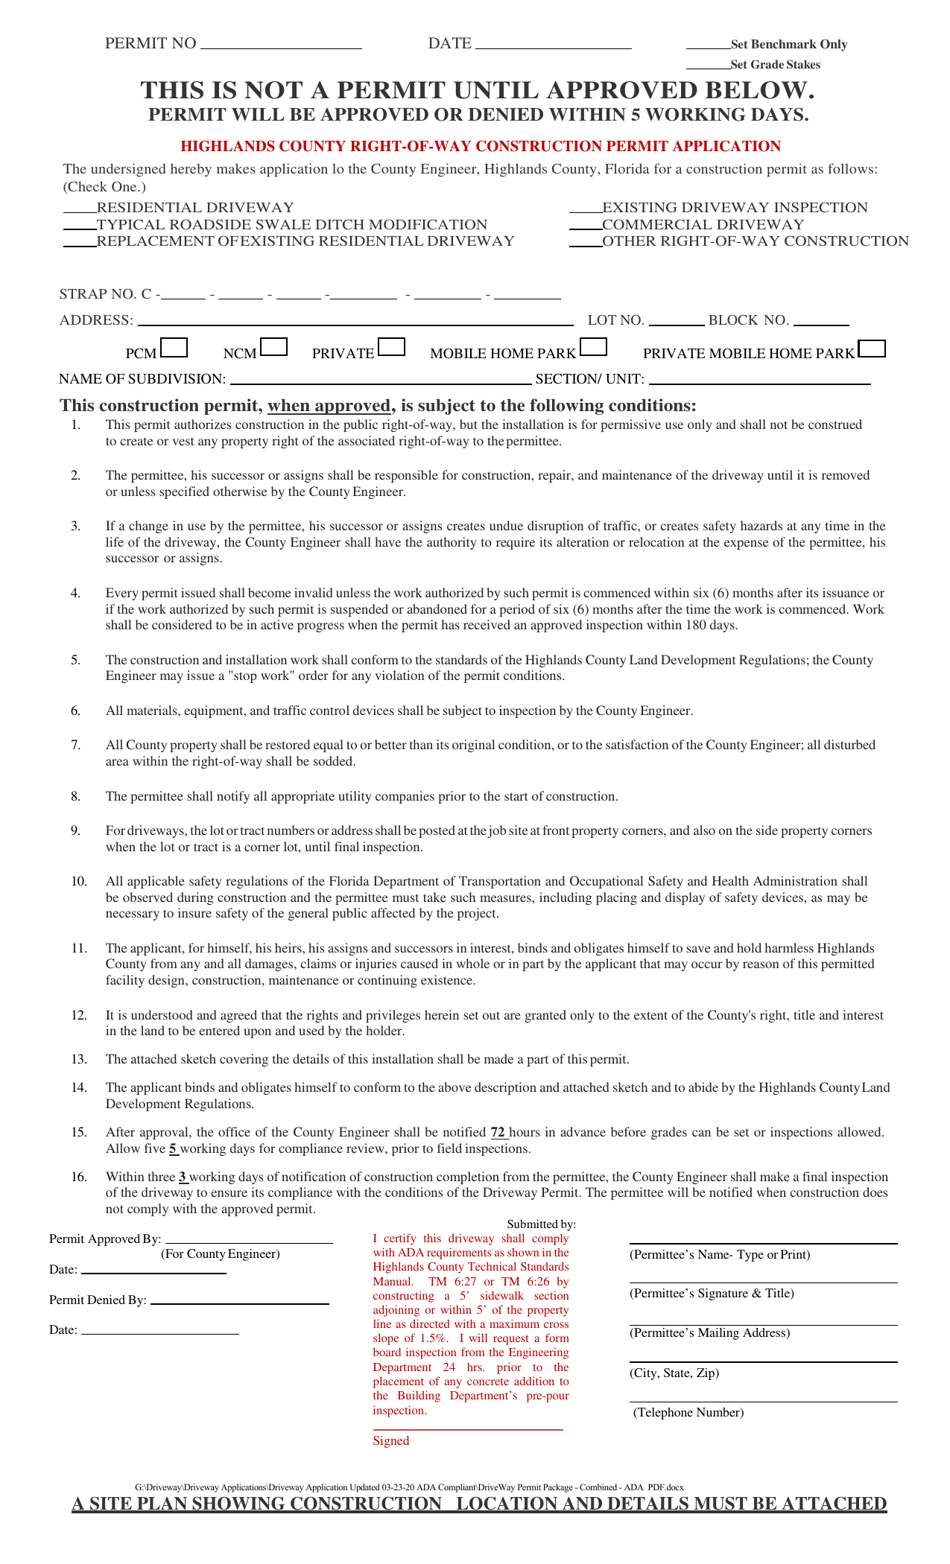 Right-Of-Way Construction Permit Application - Highlands County, Florida, Page 1